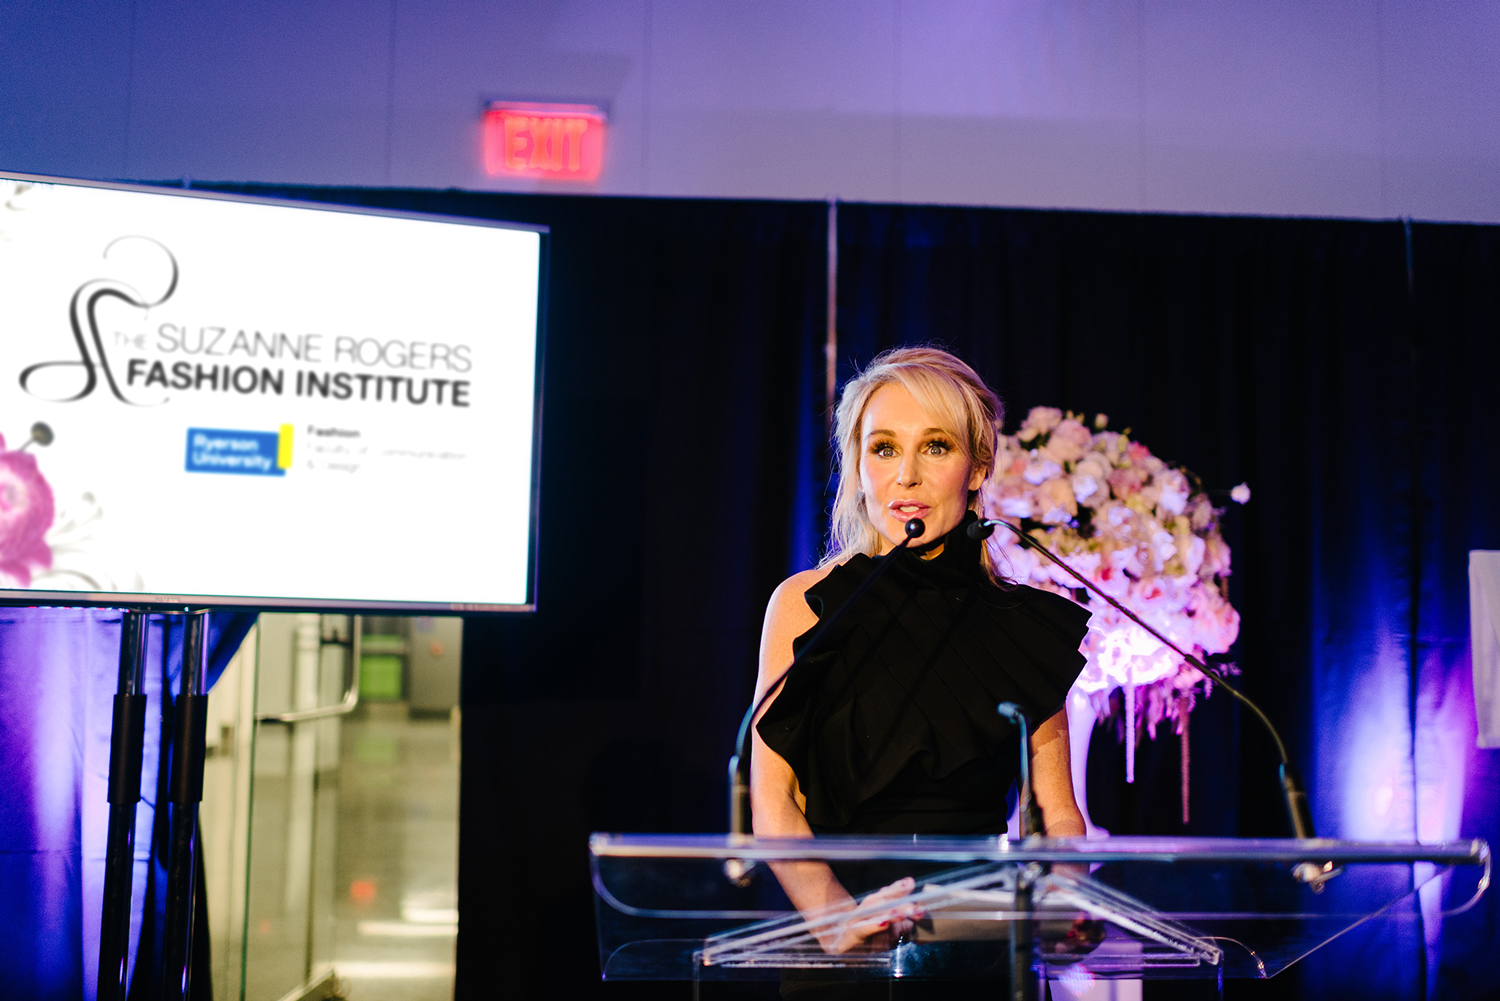 Suzanne Rogers on stage announcing the inauguration of The Suzanne Rogers Fashion Institute wearing a black dress.